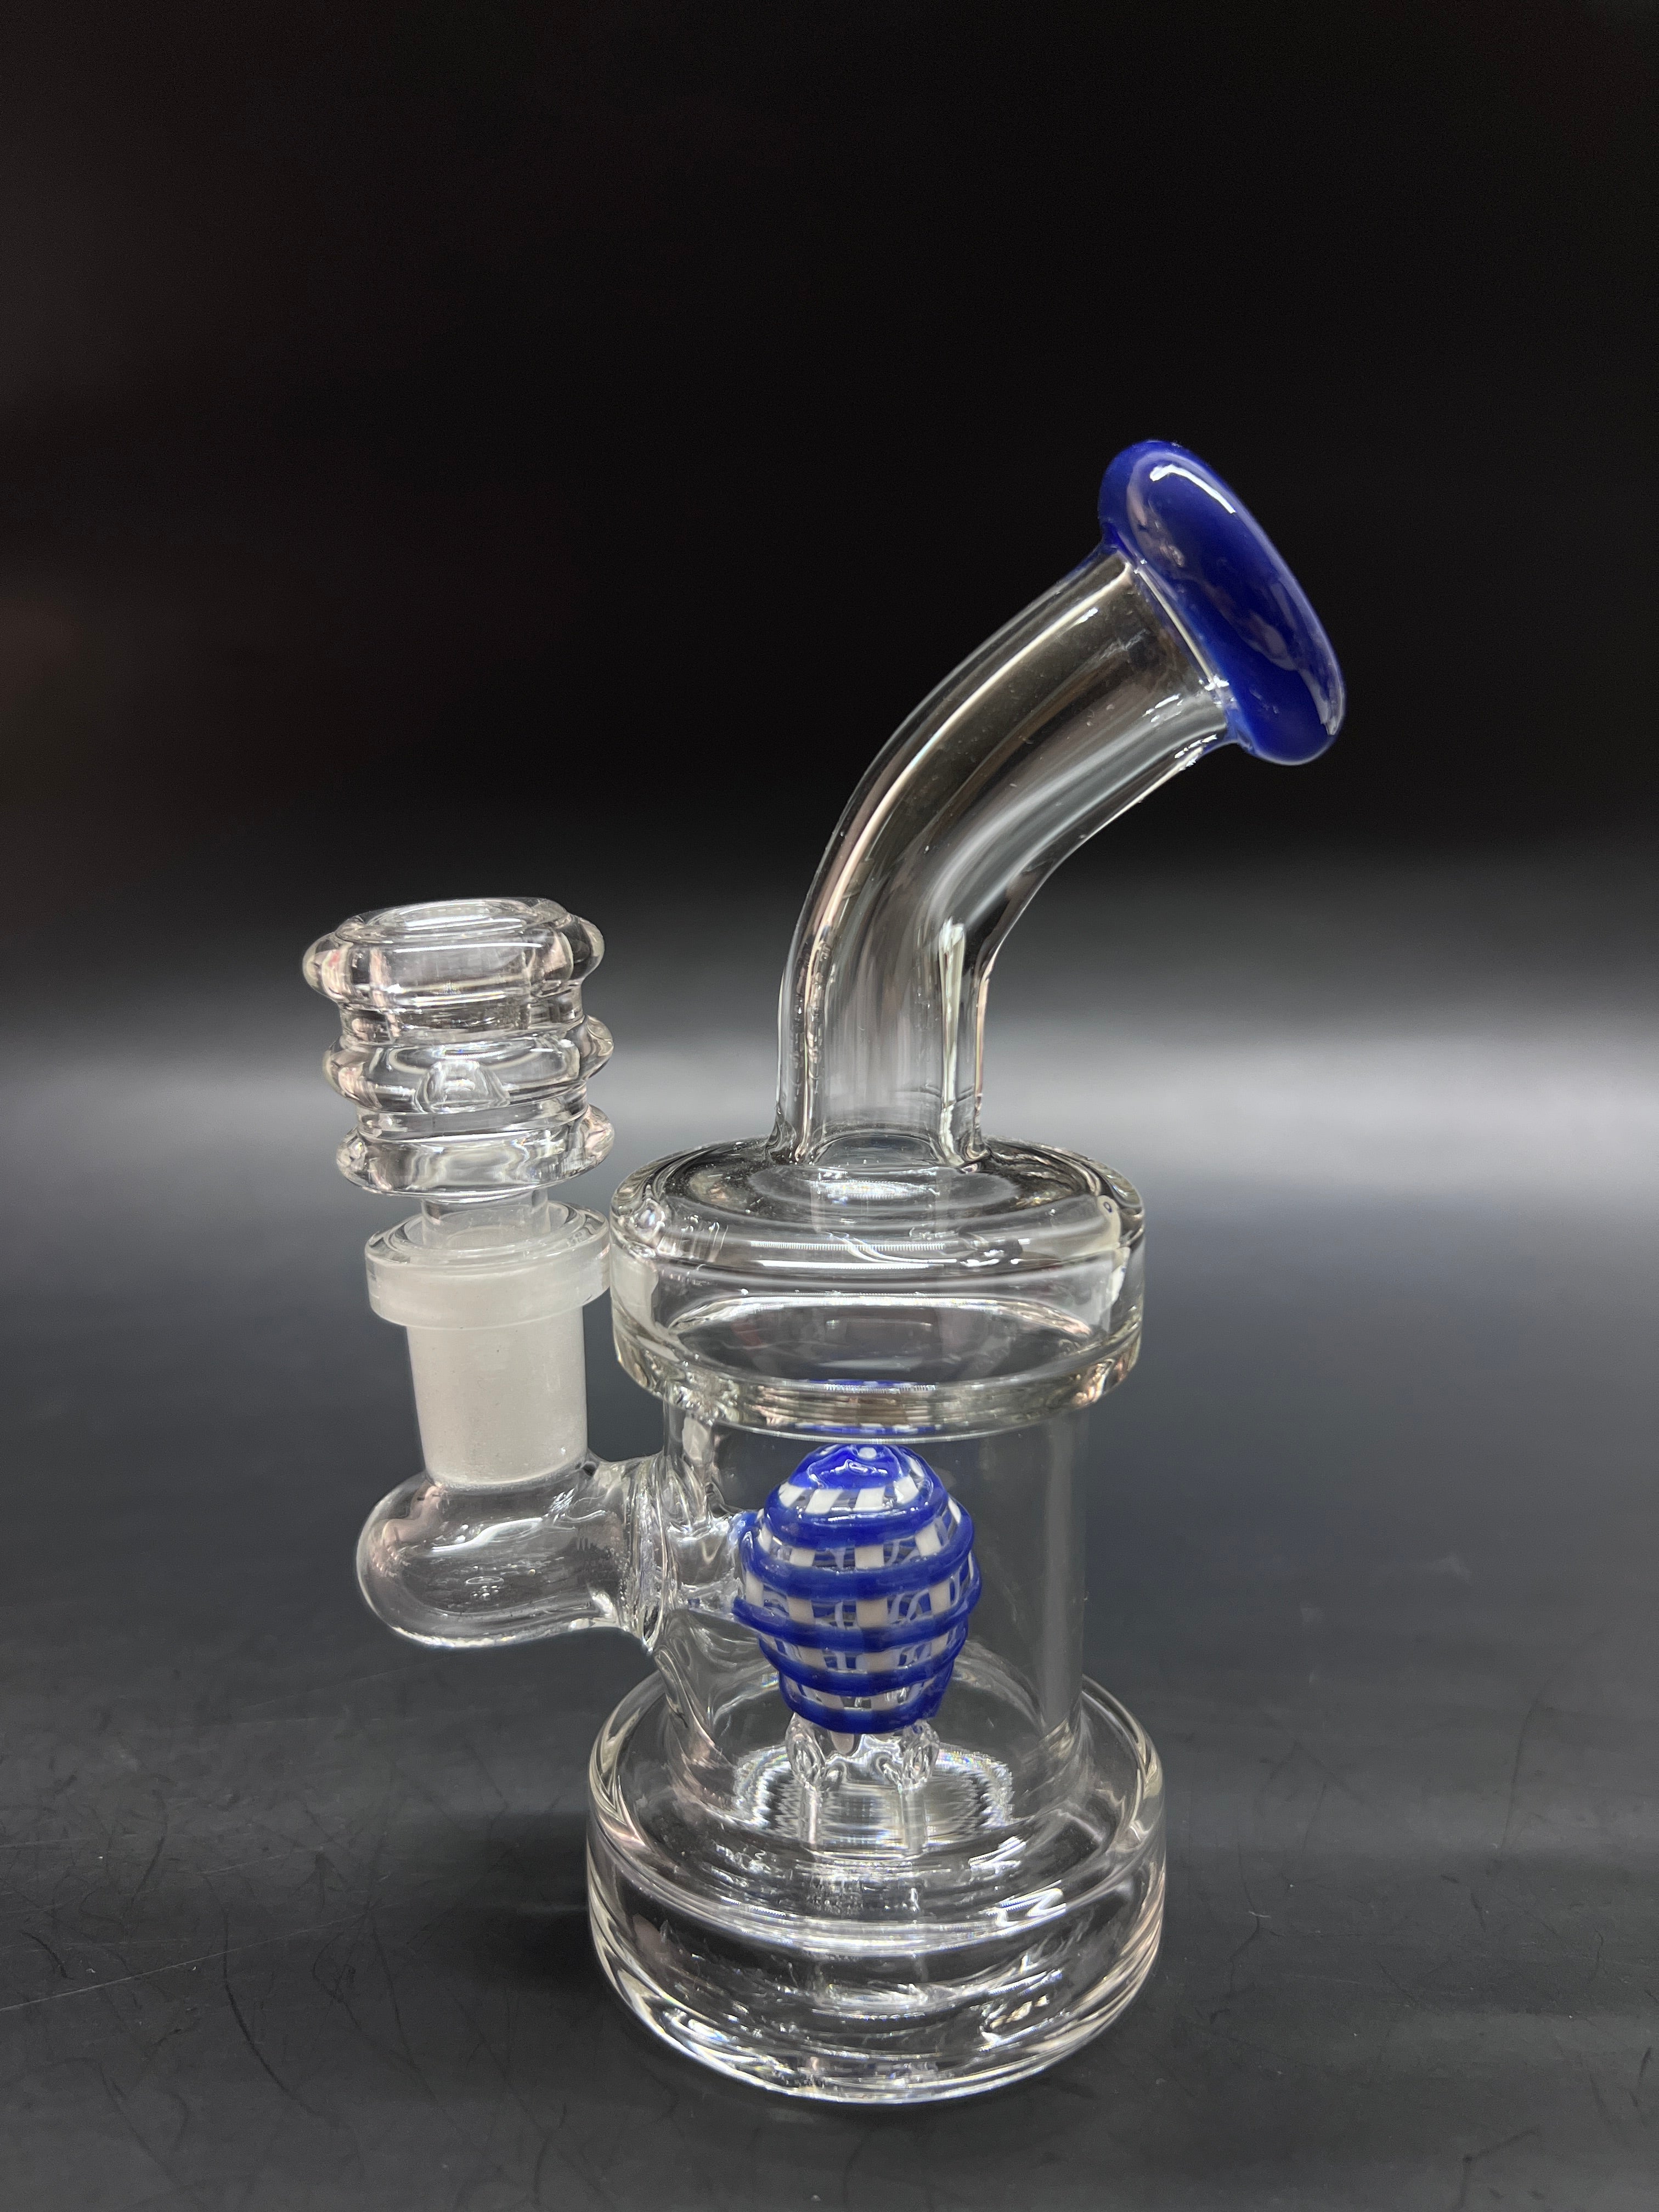 Sphere Care Thick Glass Spiral Bowl Smoking Glass Water Bong